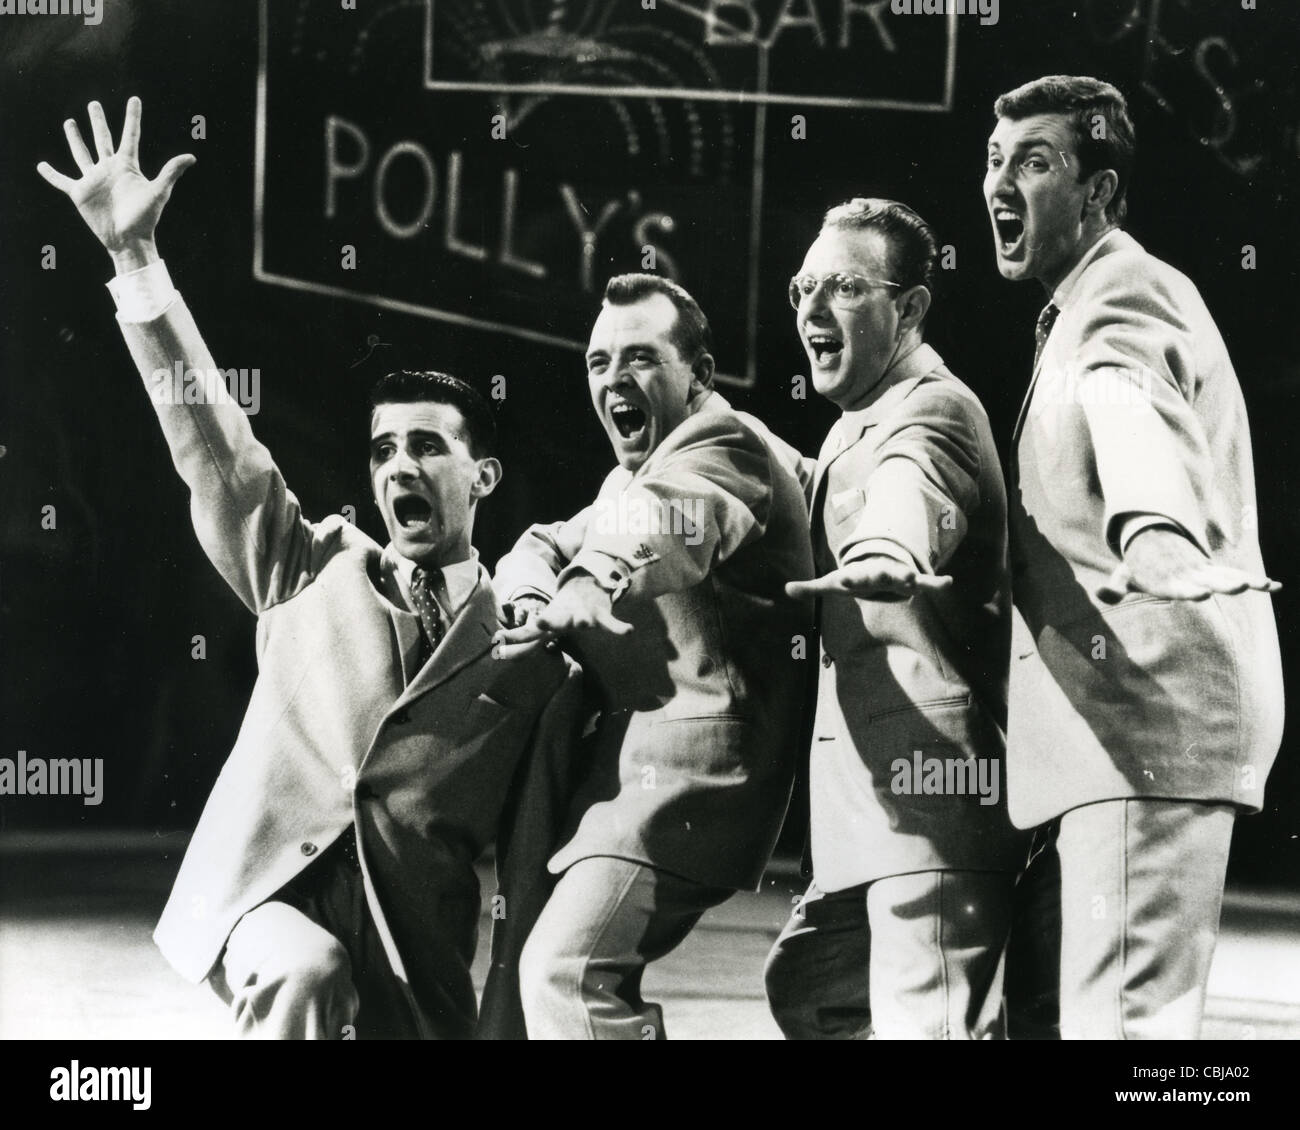 THE POLKA DOTS  Promotional photo of UK  1950s vocal group Stock Photo